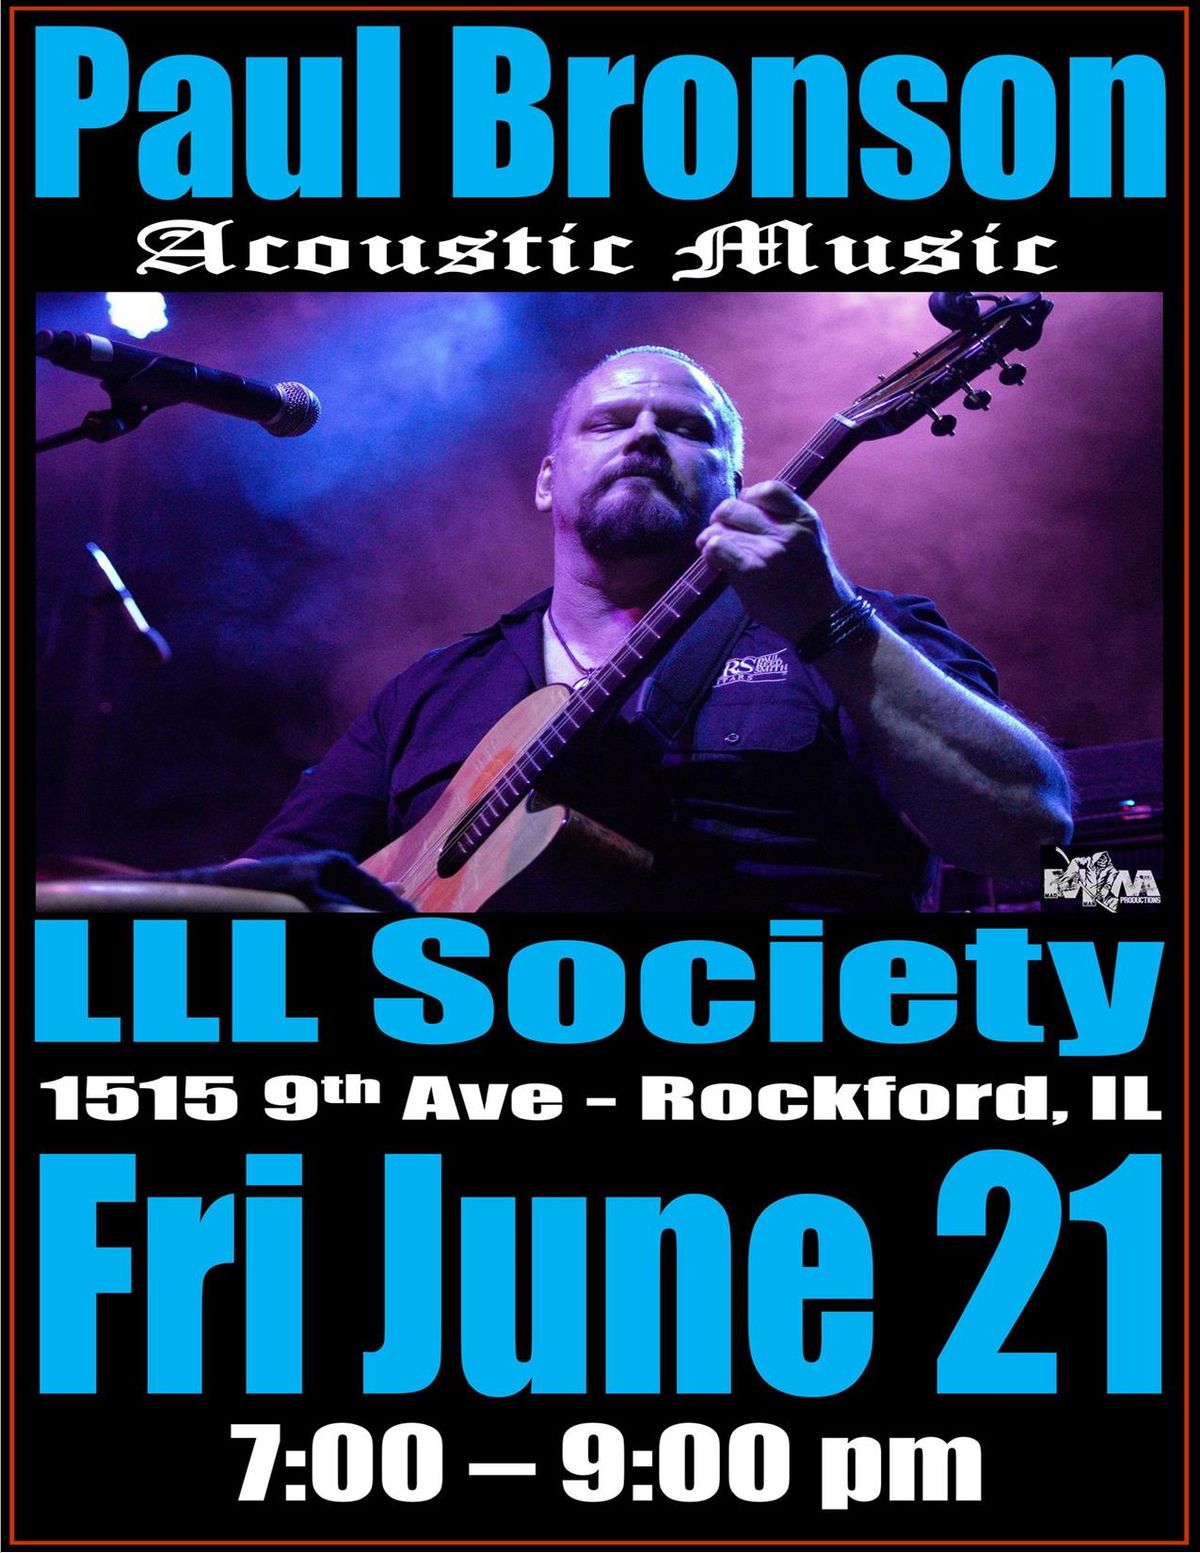 Paul Bronson Acoustic Music @ LLL Society  - Rockford, IL  - Friday, June 21st  *members only*